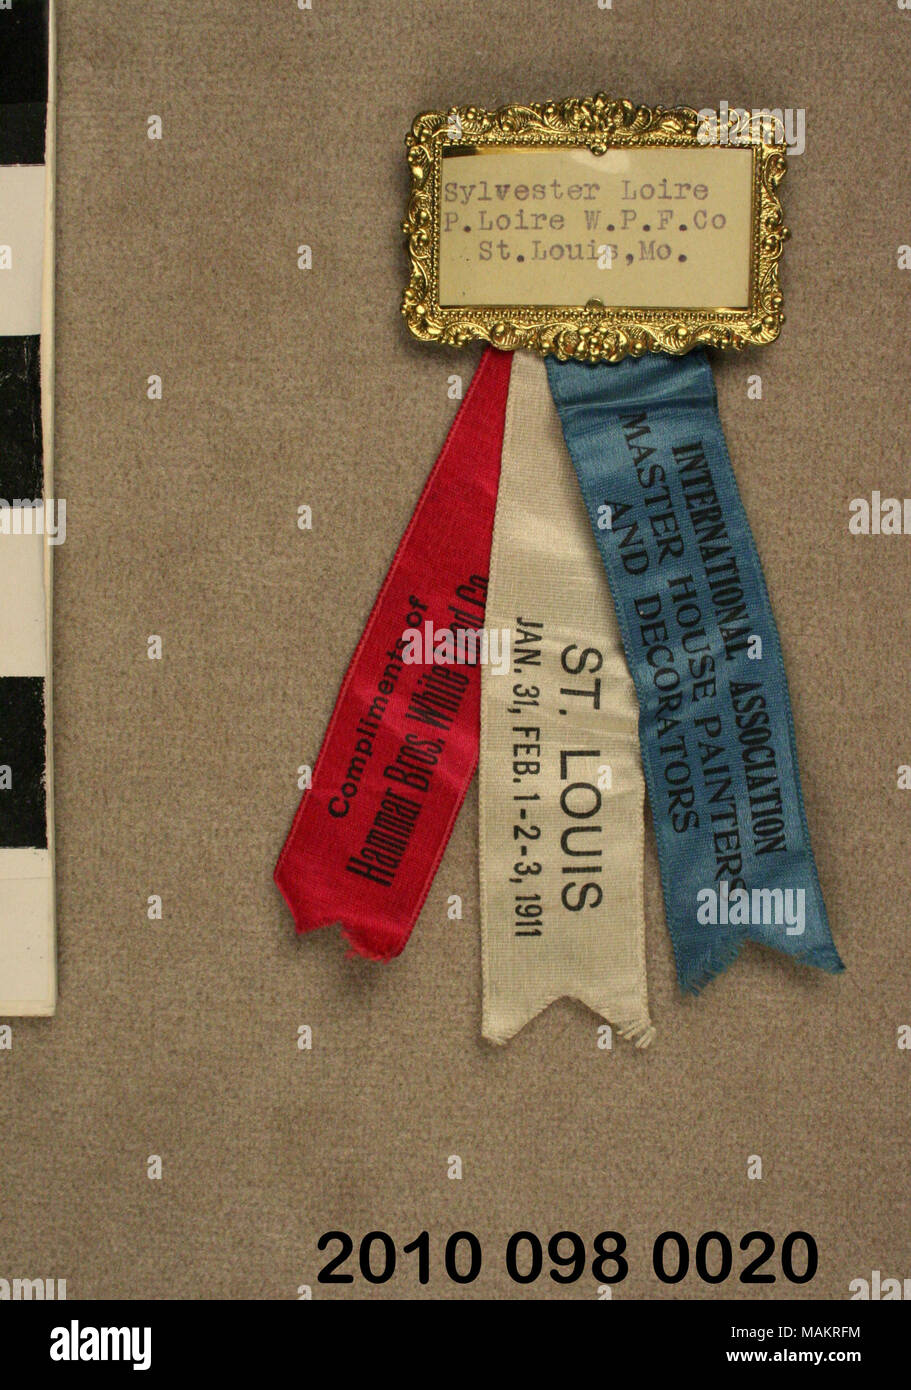 Badge of Sylvester Loire from the International Association of Master House Painters and Decorators convention in St. Louis in 1911. Brass frame with Loirs's name typed on paper and three ribbons hanging below. Title: House Painters and Decorators Convention Badge for Sylvester Loire  . 1911. Stock Photo